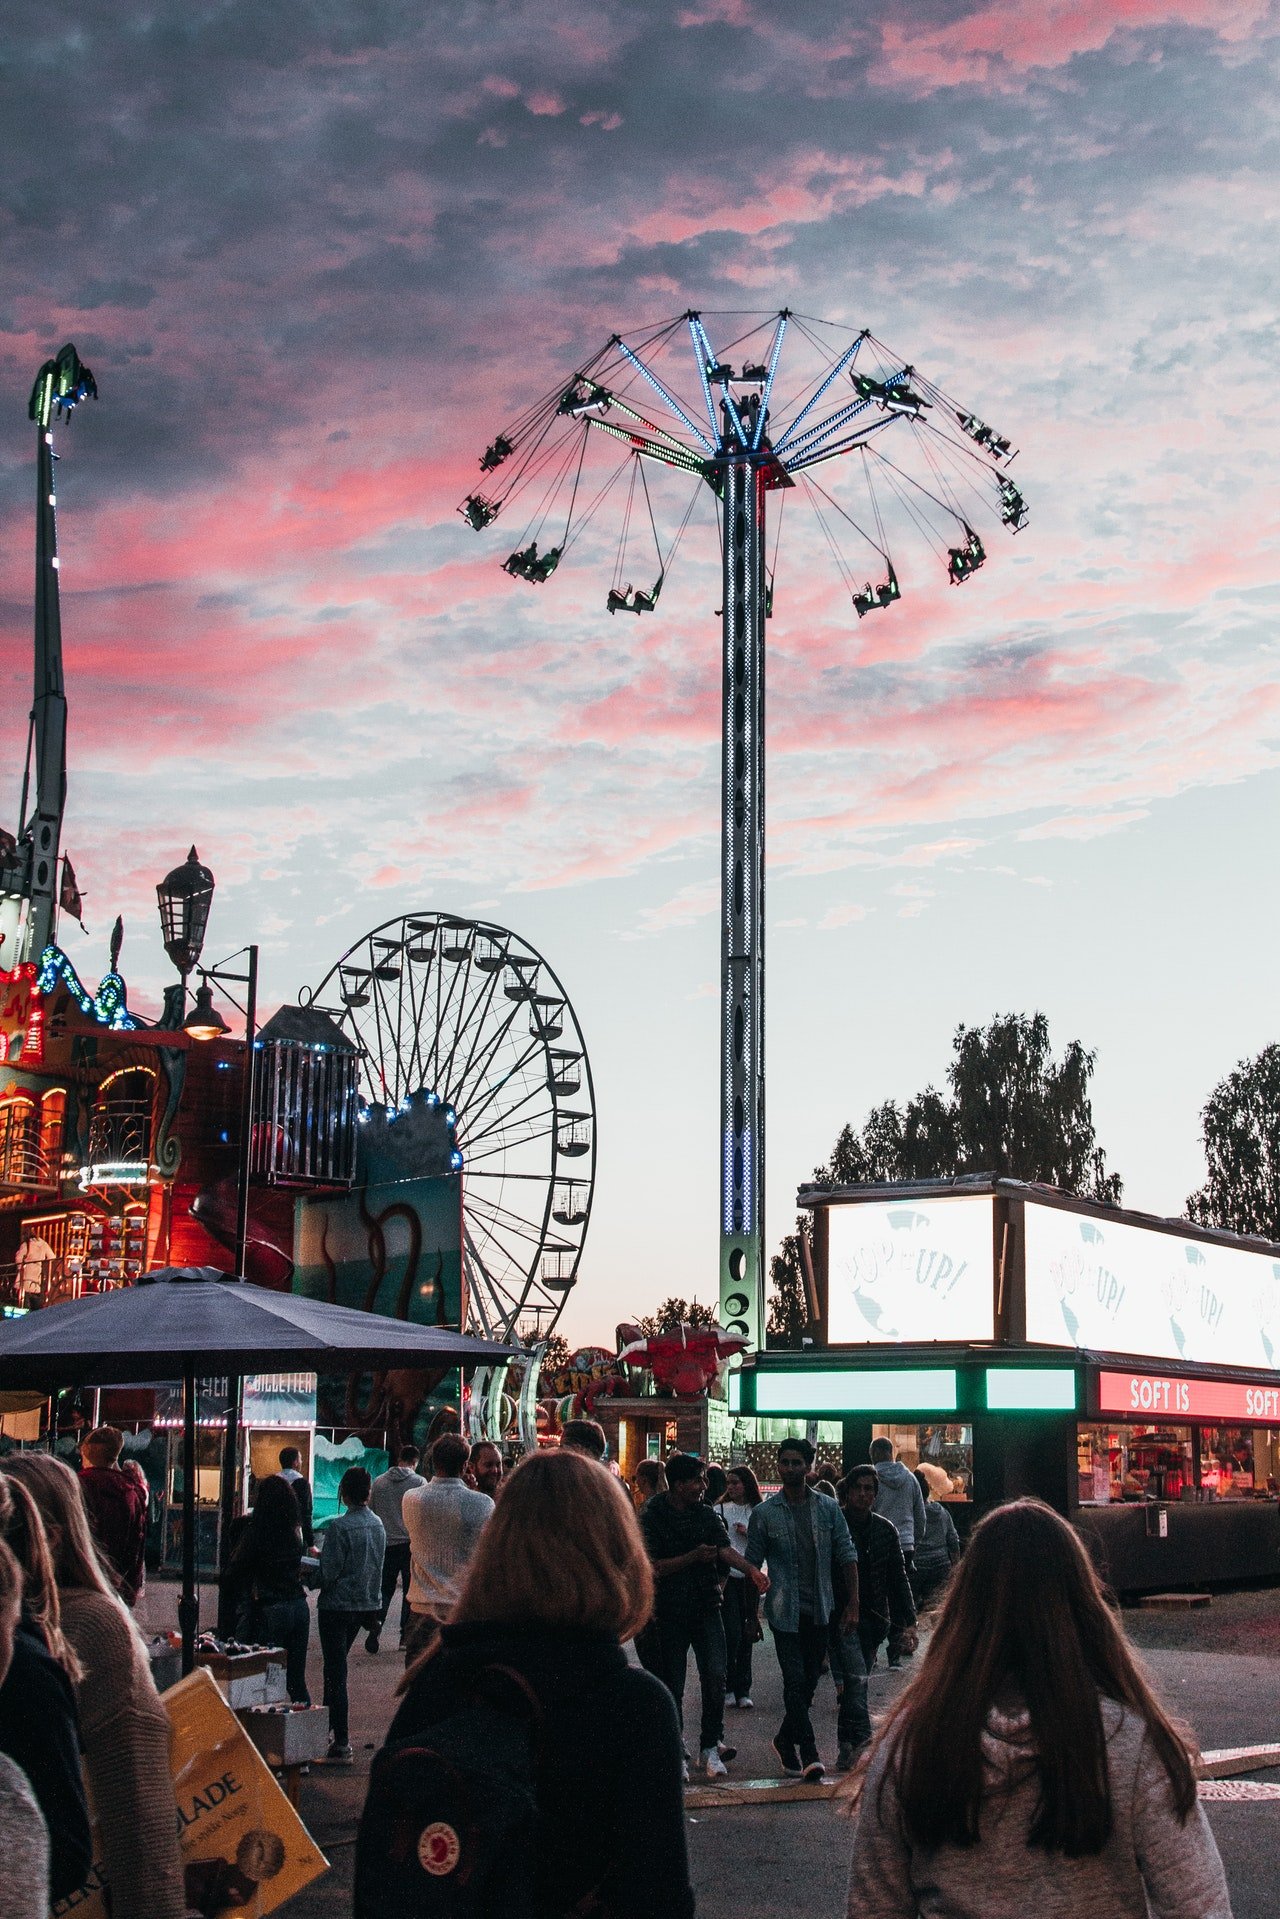 He took me to an amusement park to make up for lost time. | Source: Pexels